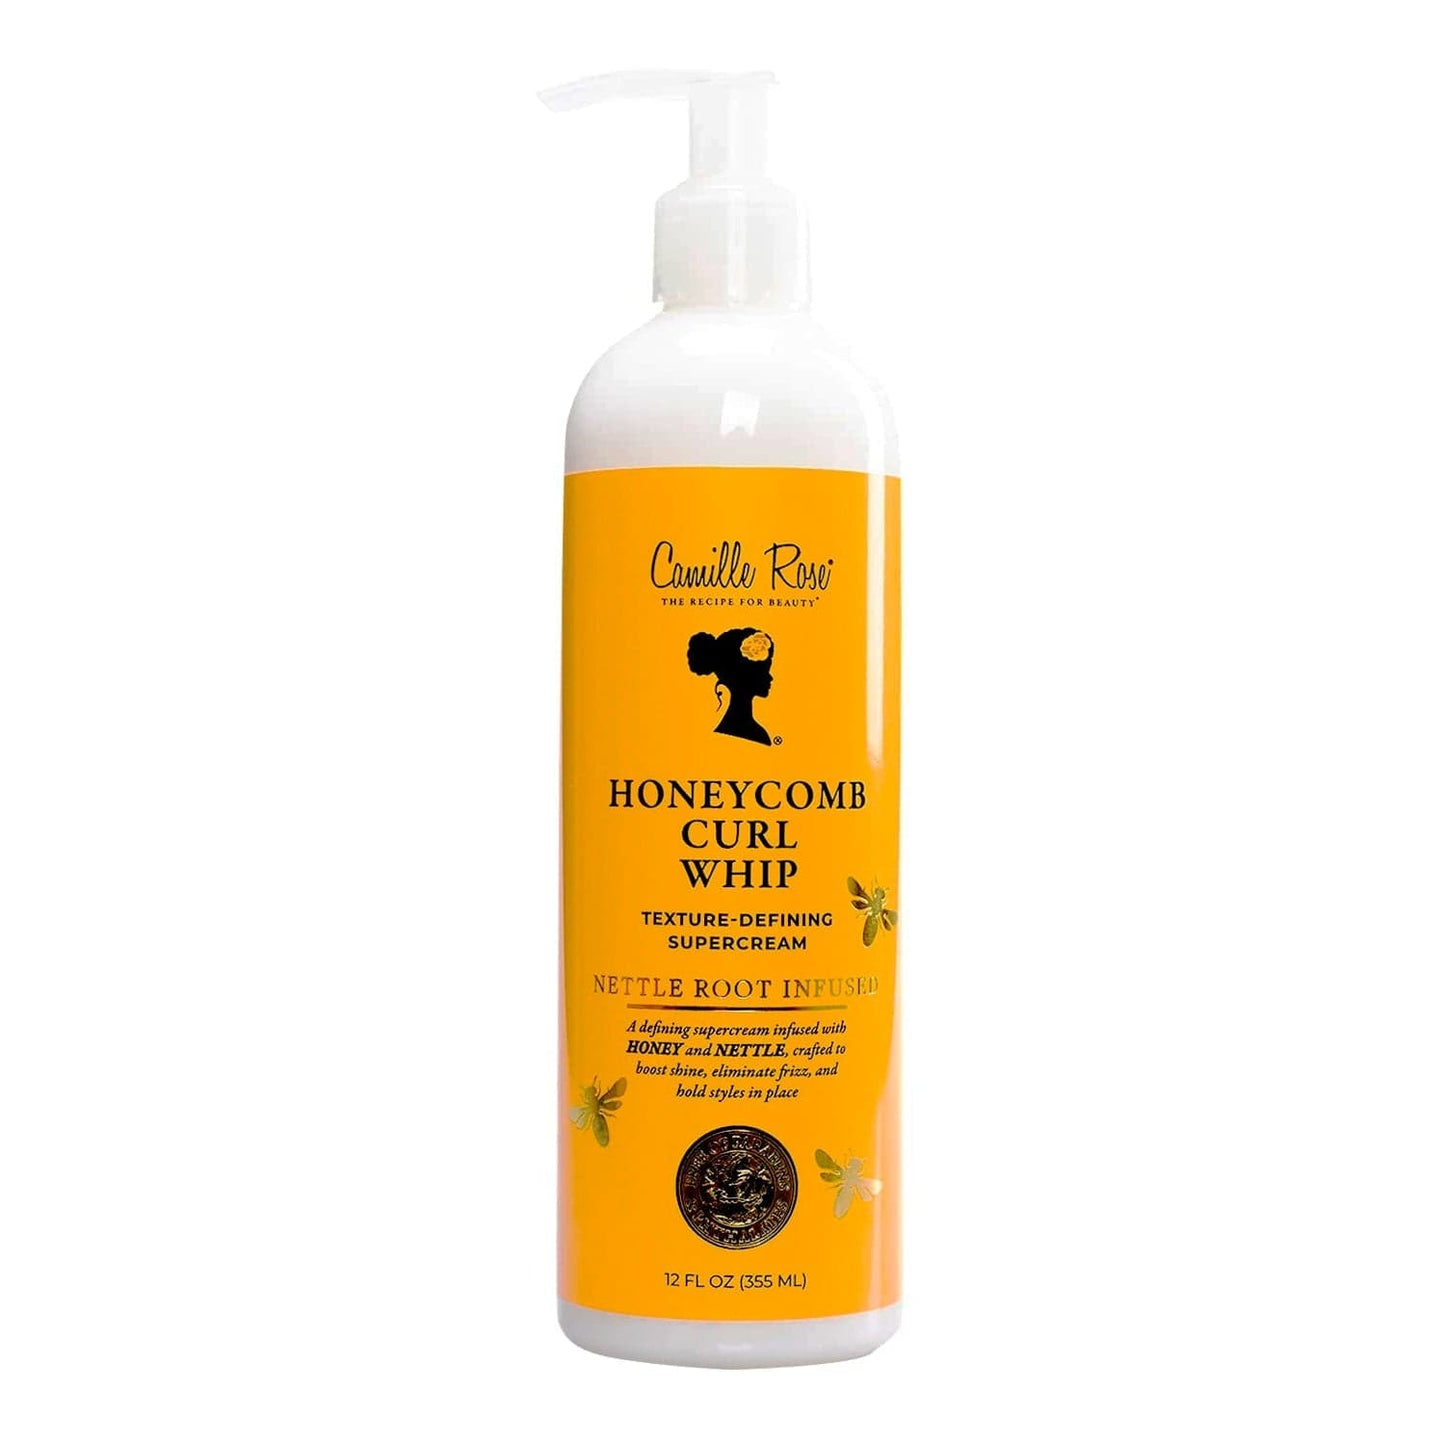 Camille Rose - Honeycomb curl whip definition cream - 355ml - Camille Rose - Ethni Beauty Market